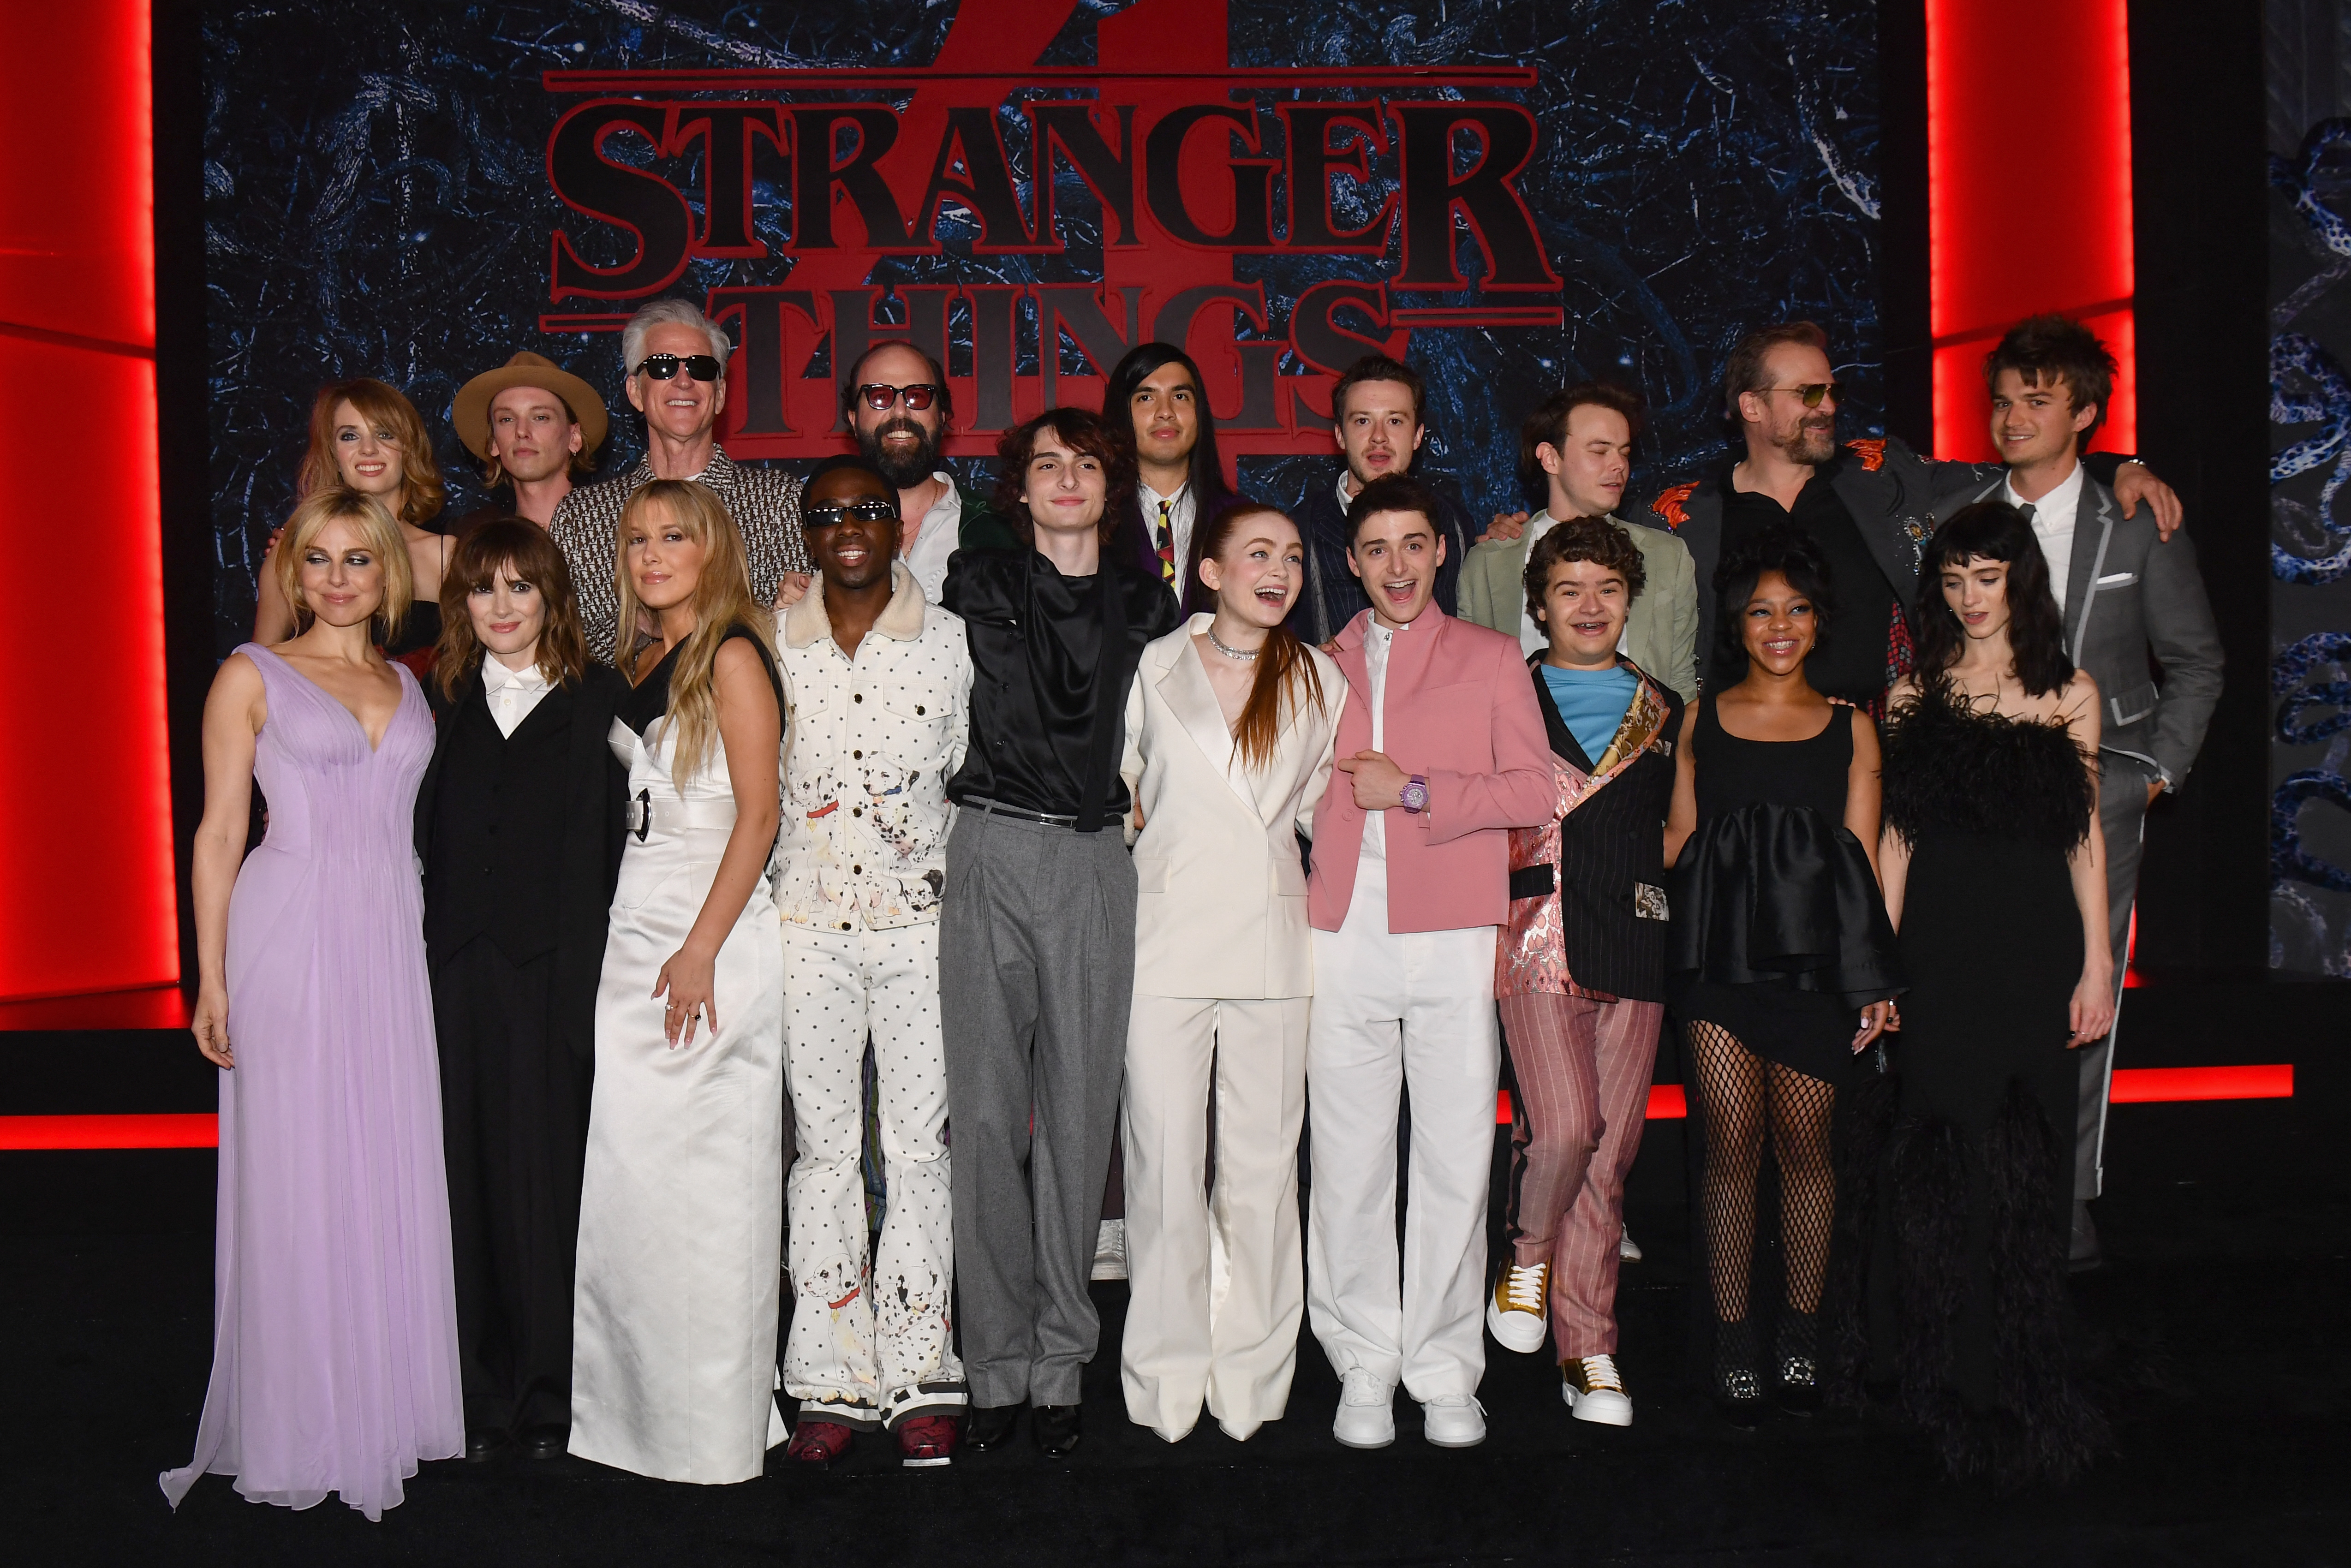 Stranger Things 4: Where did these famous cast members go to college?